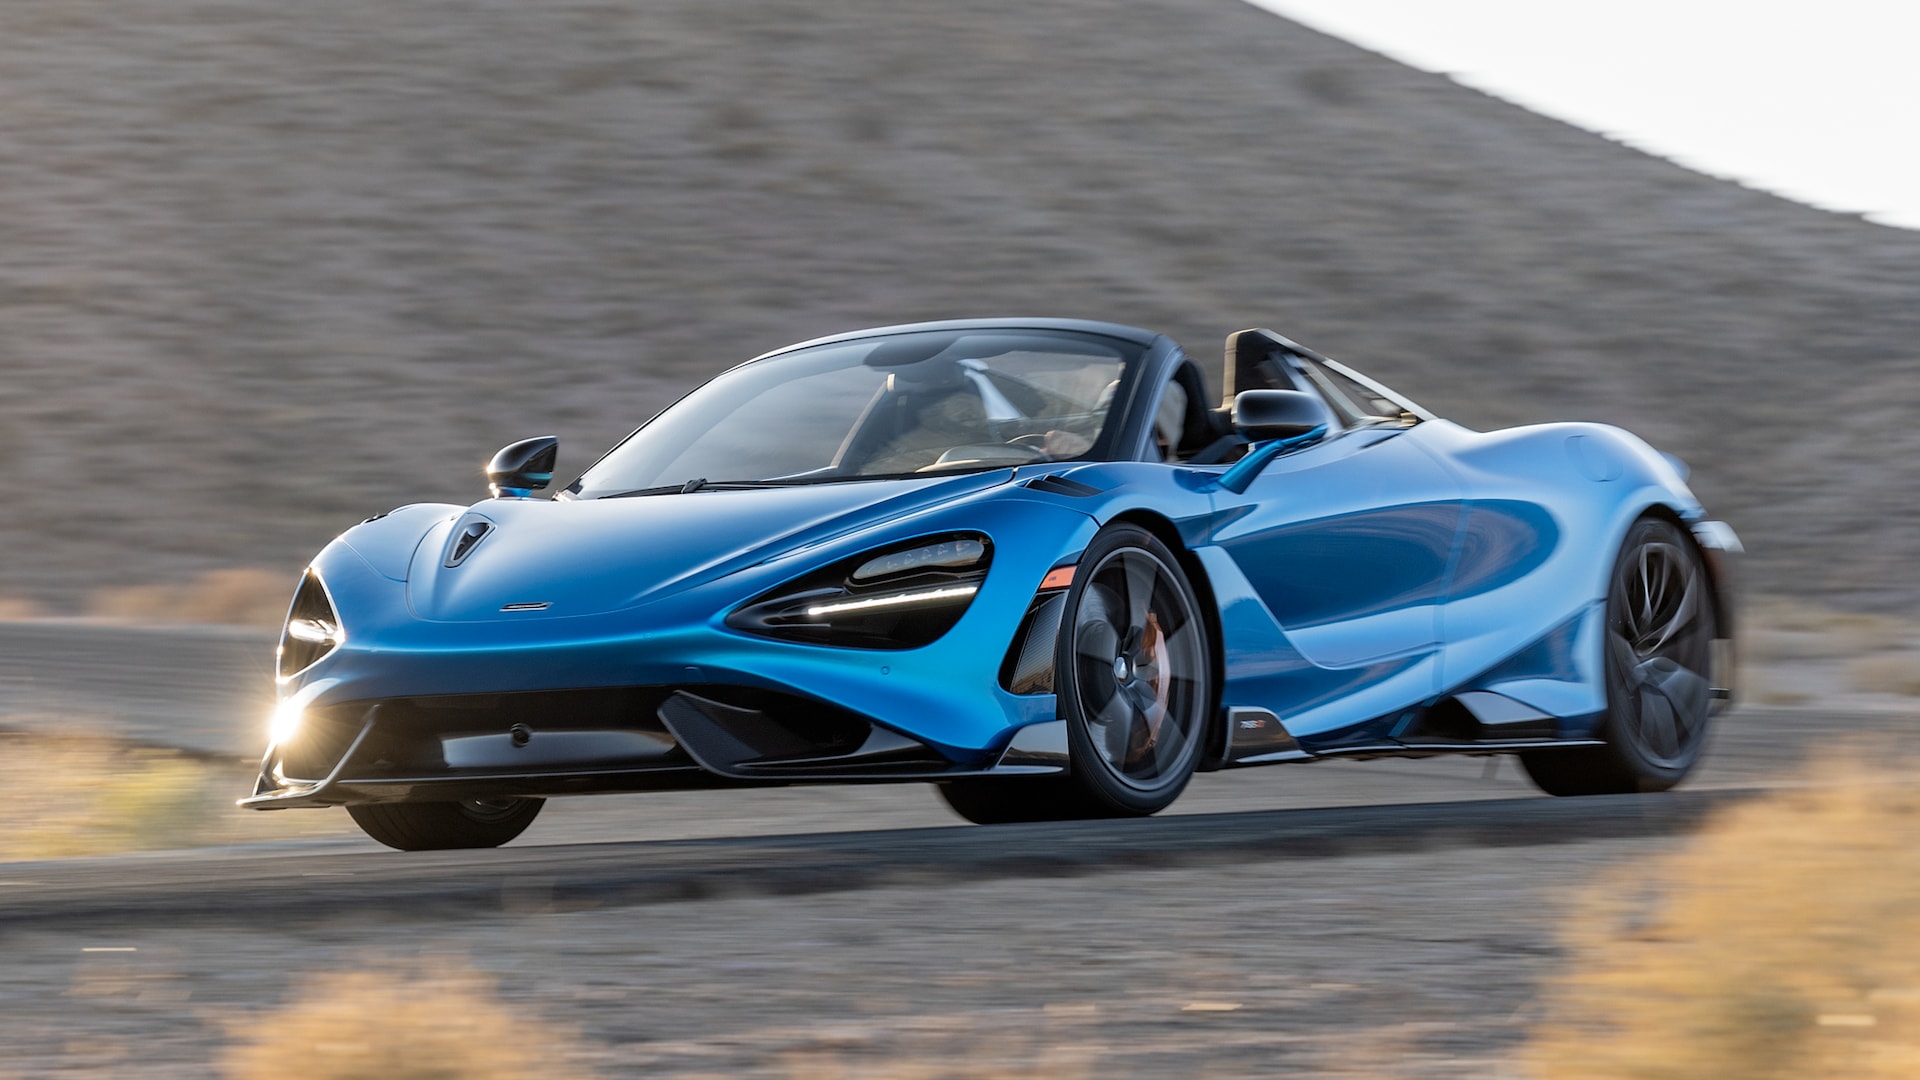 2022 McLaren 765LT Spider PVOTY Review: Keep on Smiling